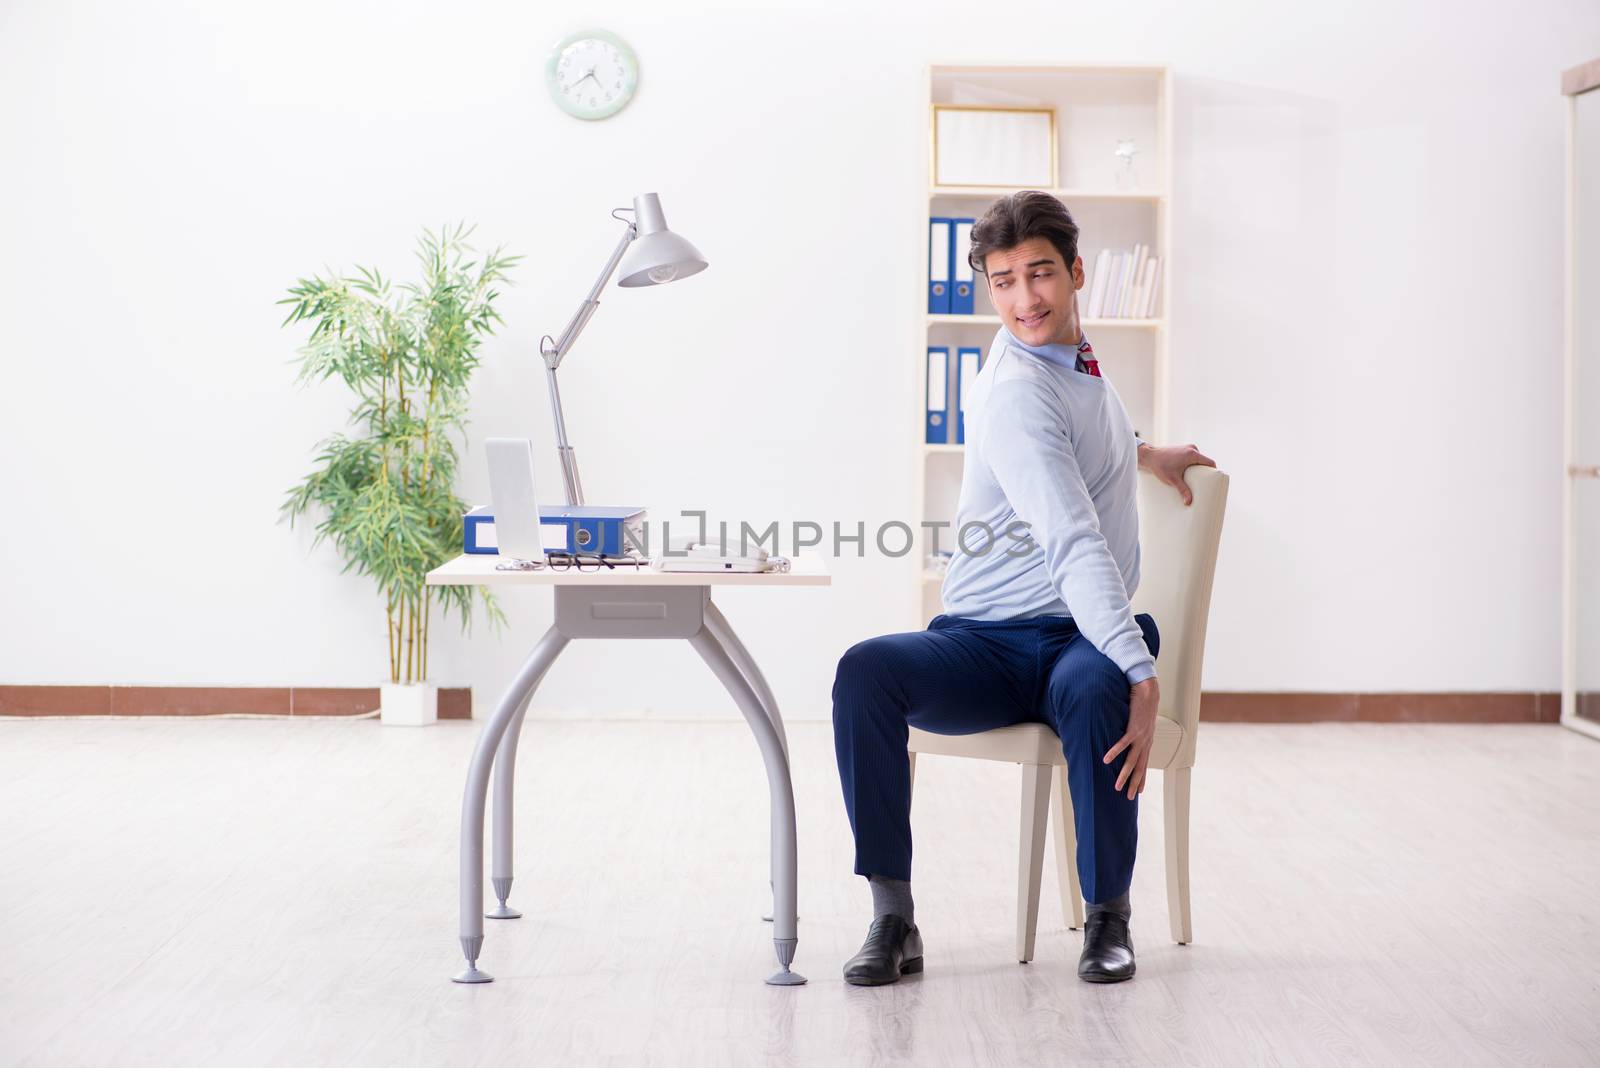 Employee doing stretching exercises in the office